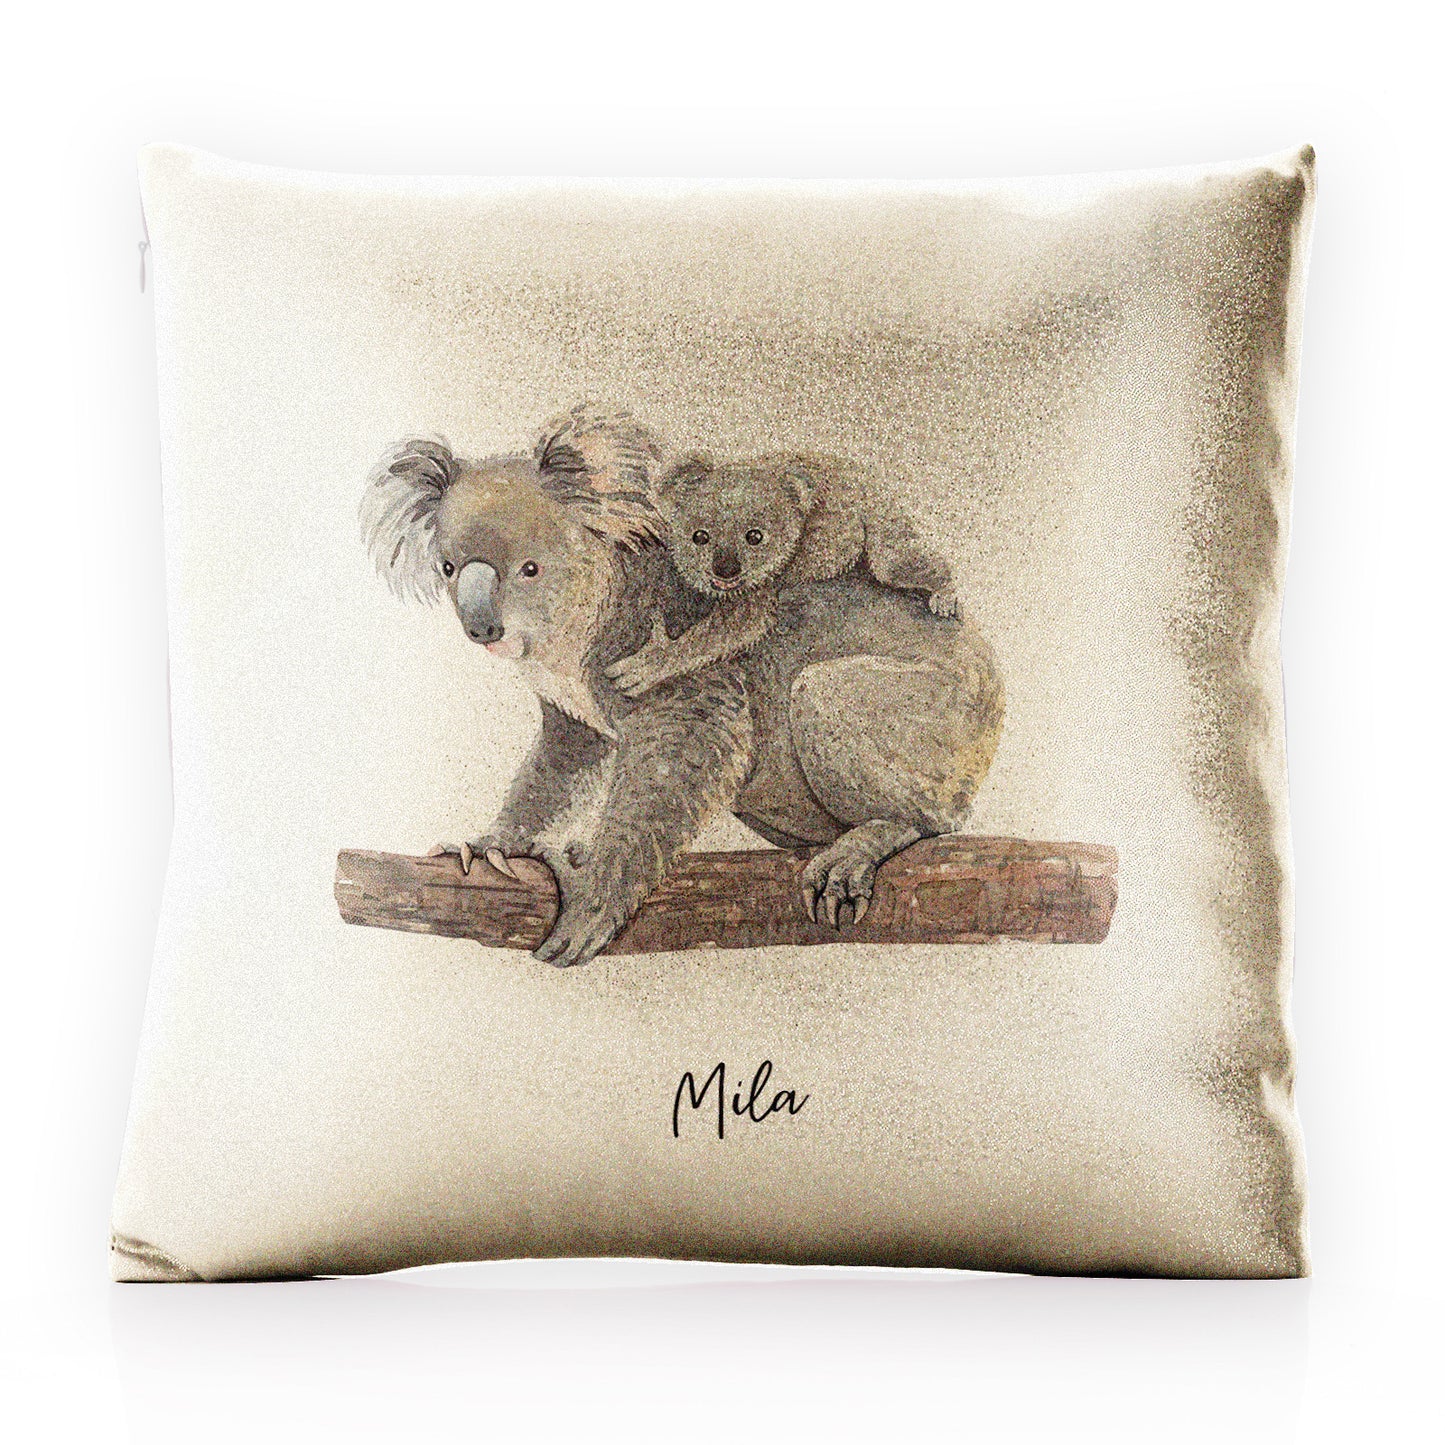 Personalised Glitter Cushion with Welcoming Text and Embracing Mum and Baby Koalas